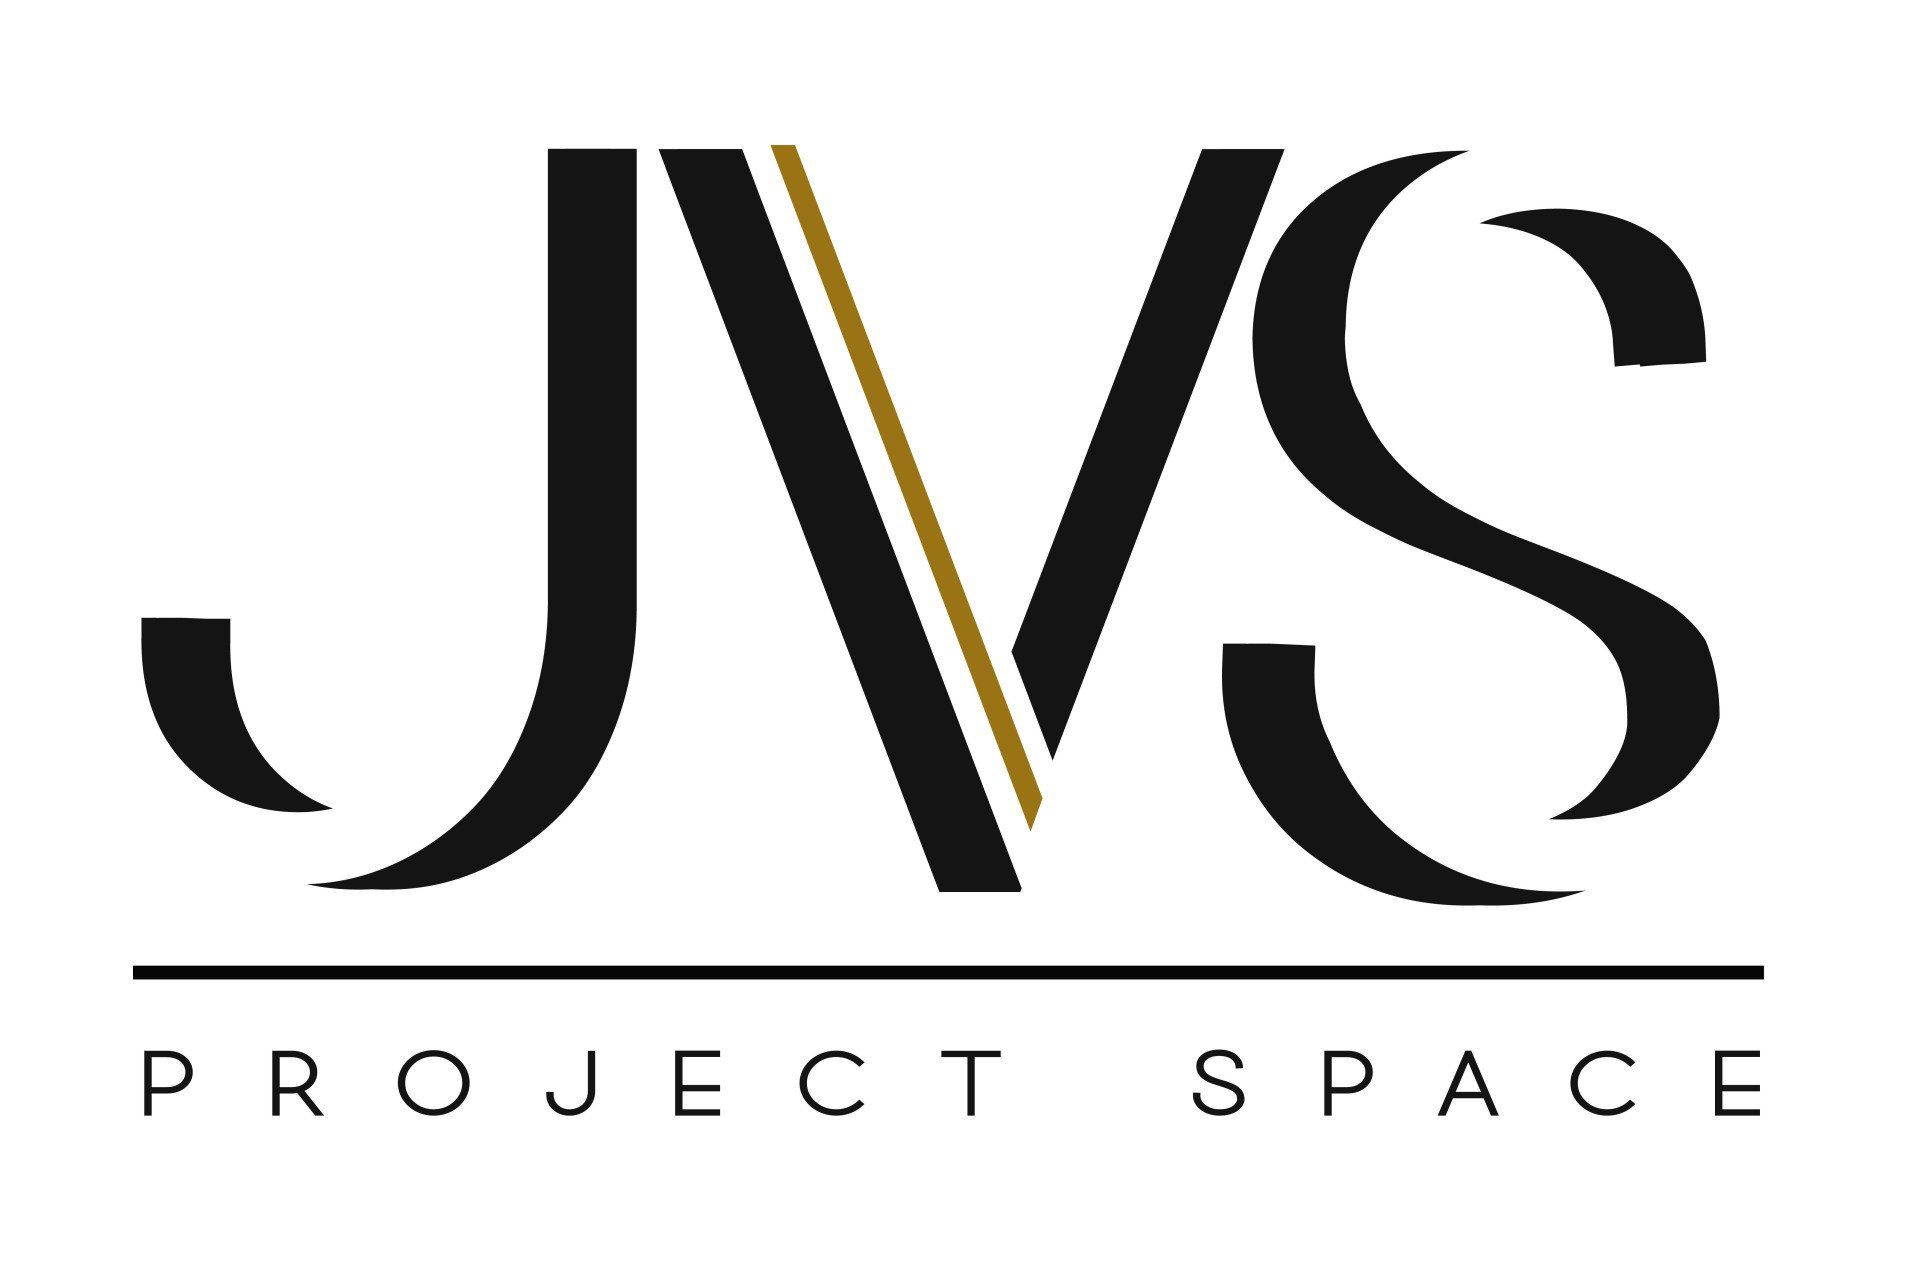 the logo for jvs project space is black and gold .